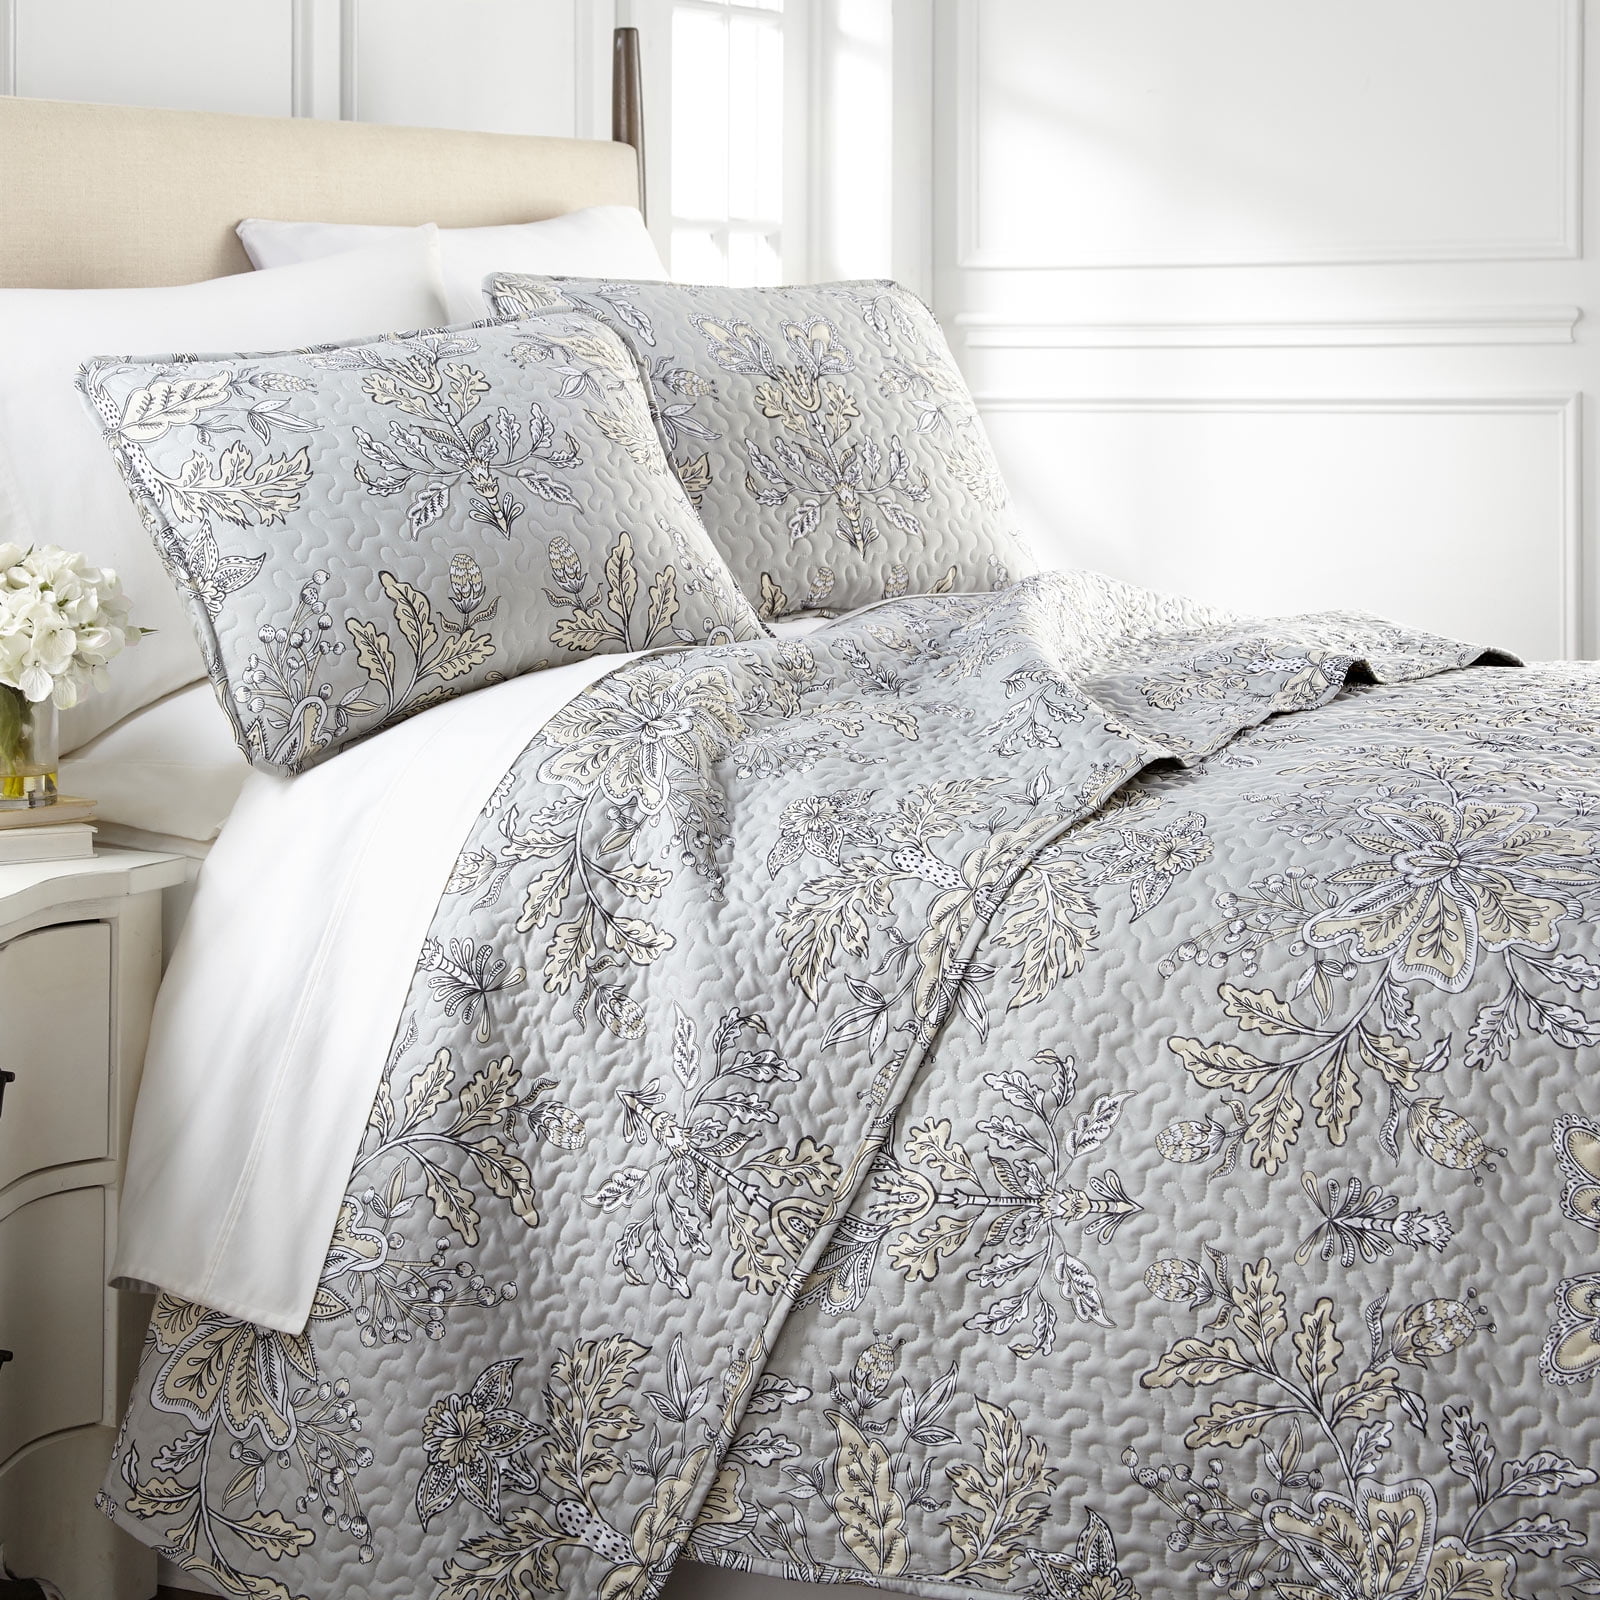 Details about   Gray Quilted Coverlet & Pillow Shams Set Vintage Style White Roses Print 